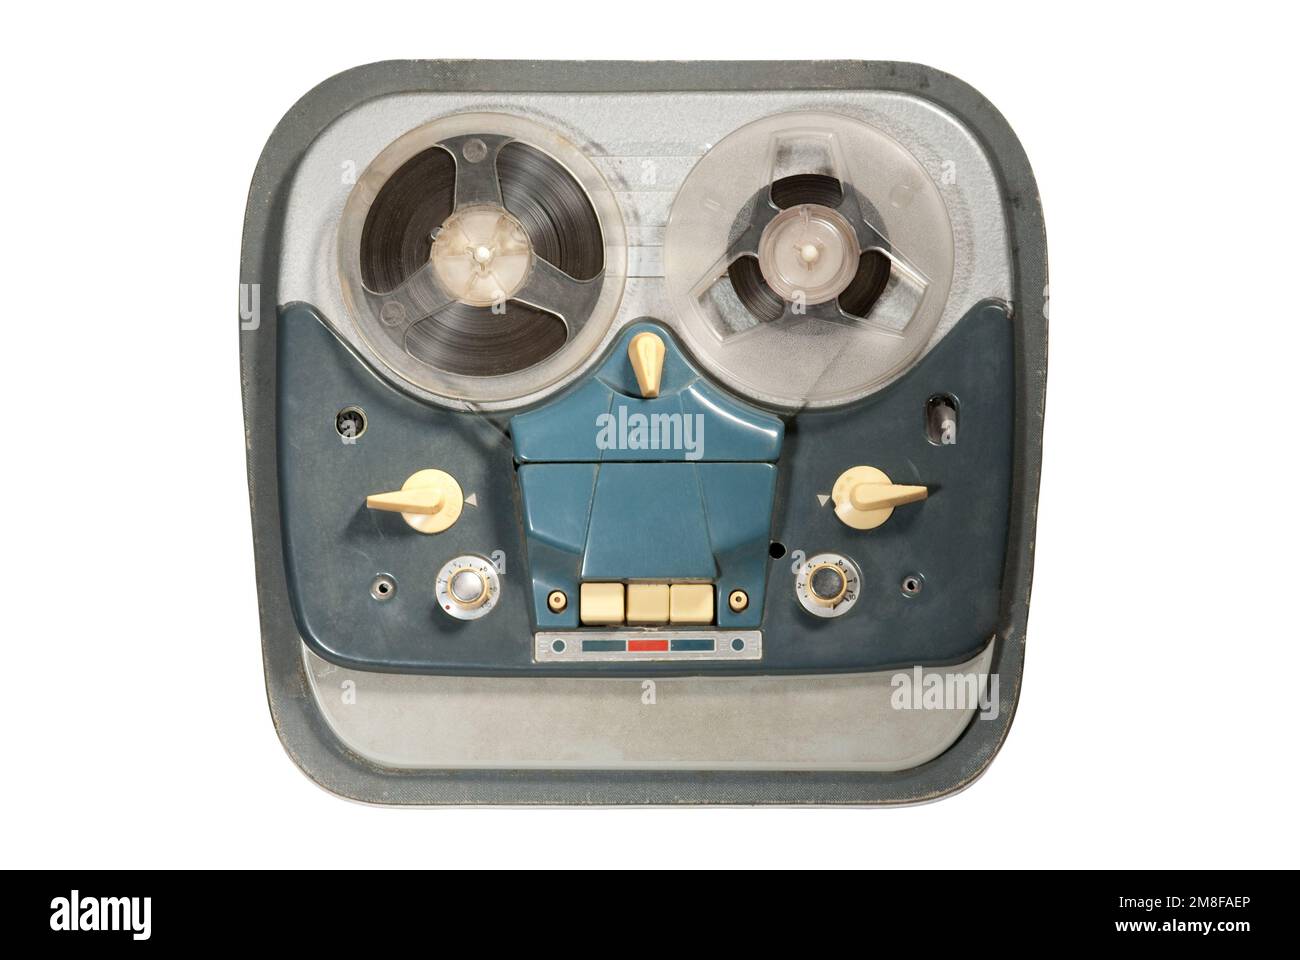 Old portable reel to reel tube tape recorder on the flor in room 3d render  image Stock Photo - Alamy